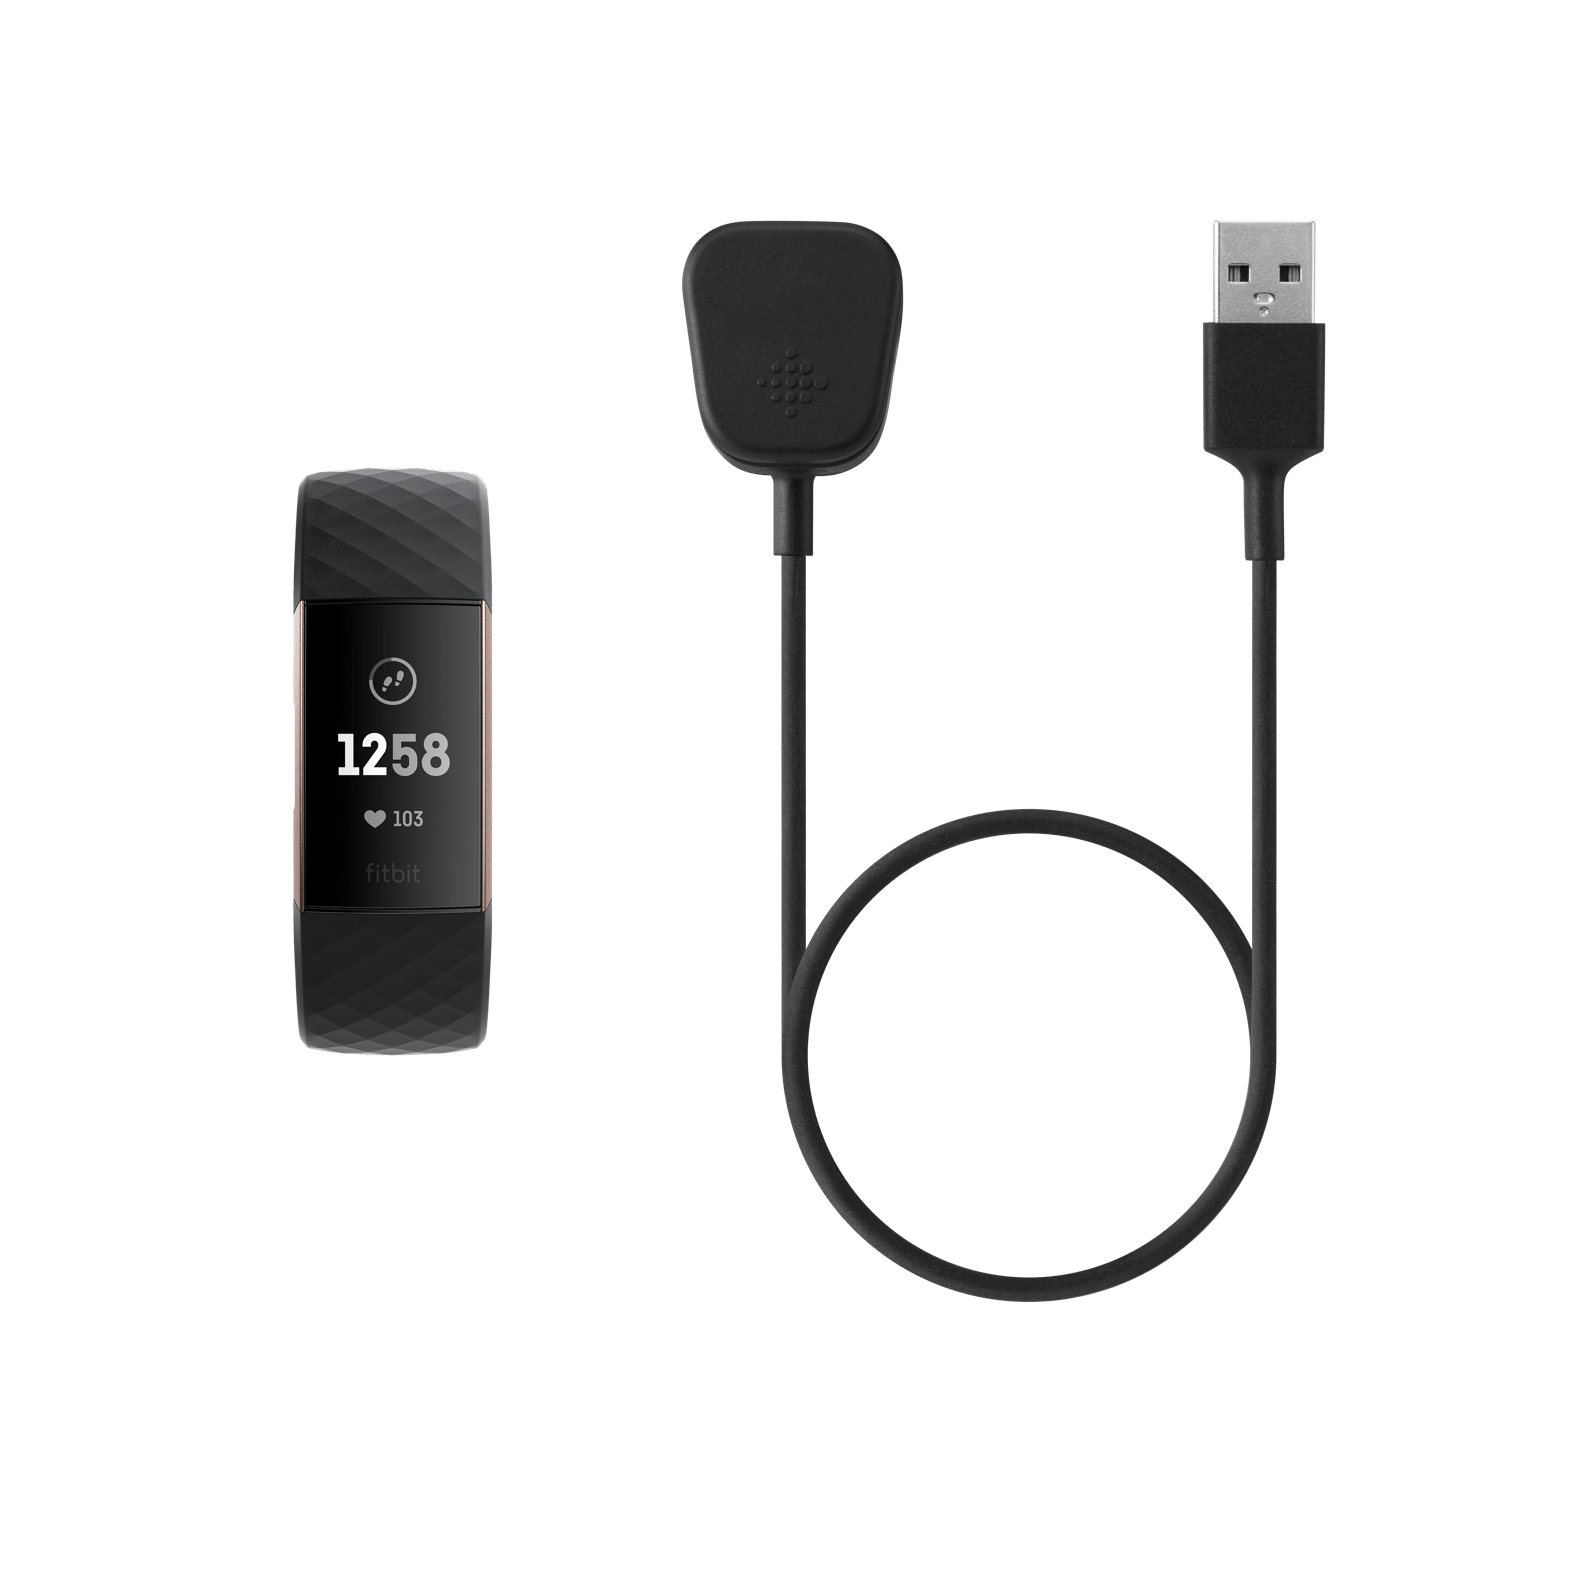 Details about   FITBIT Charging Cable for Charge 3 Activity Tracker NEW 